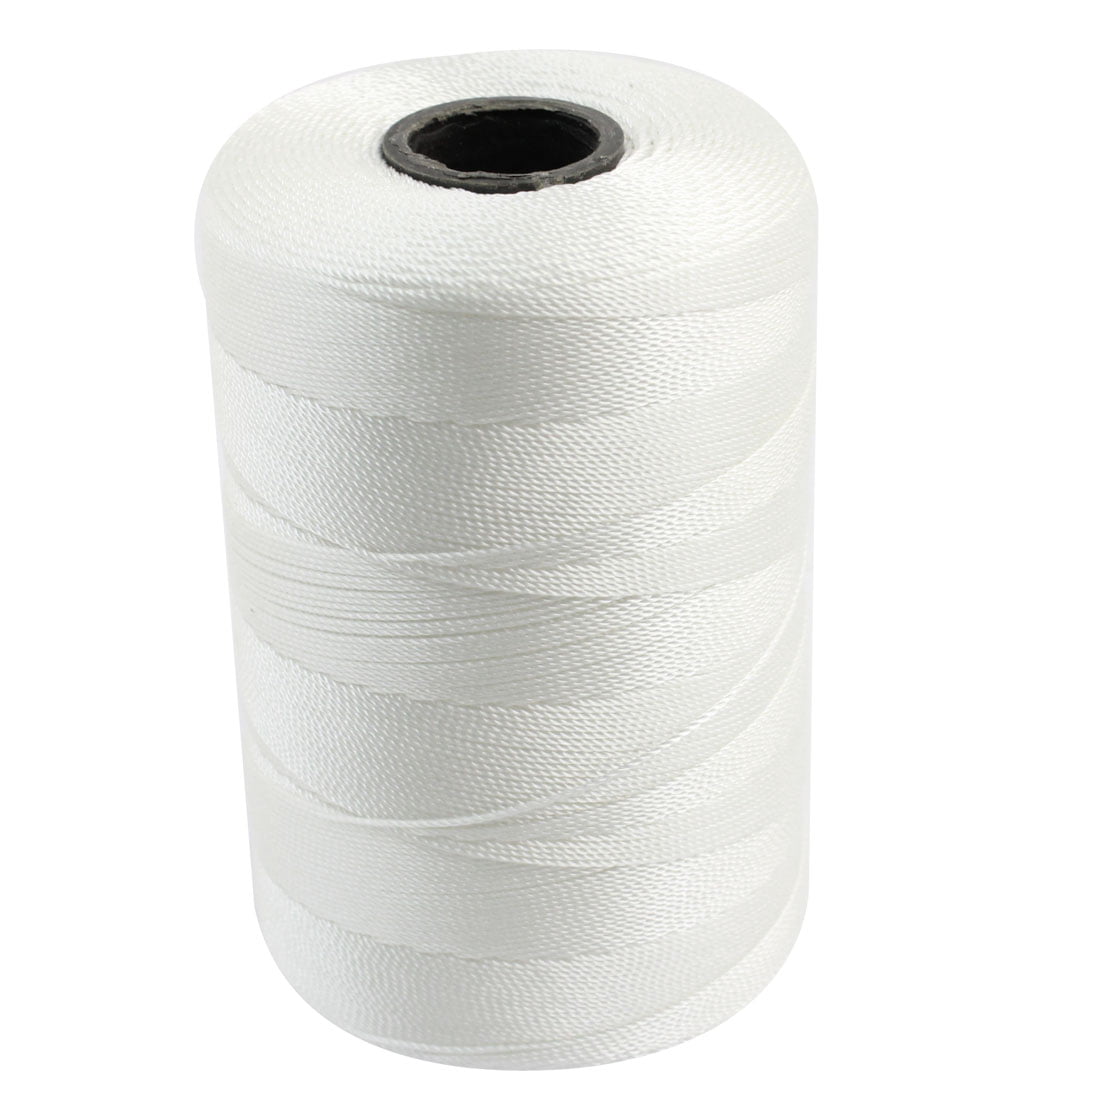 ON SPOOL WHITE GWP 3/8" X 600' Details about   3-STRAND NYLON PLUS ROPE 